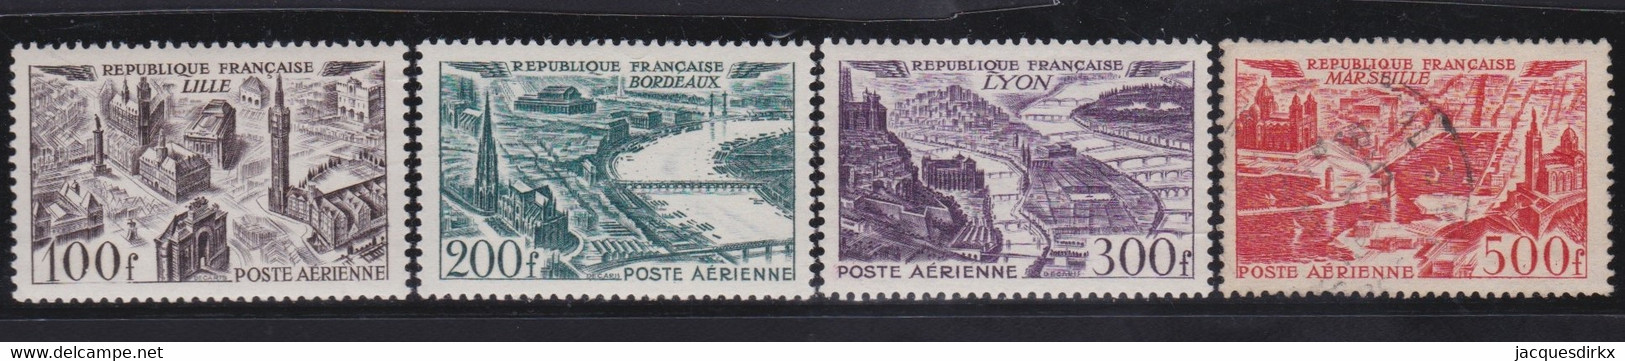 France   .   Y&T   .     PA  24/27     .    *  (27: O)    .    Neuf Avec Gomme - 1927-1959 Mint/hinged